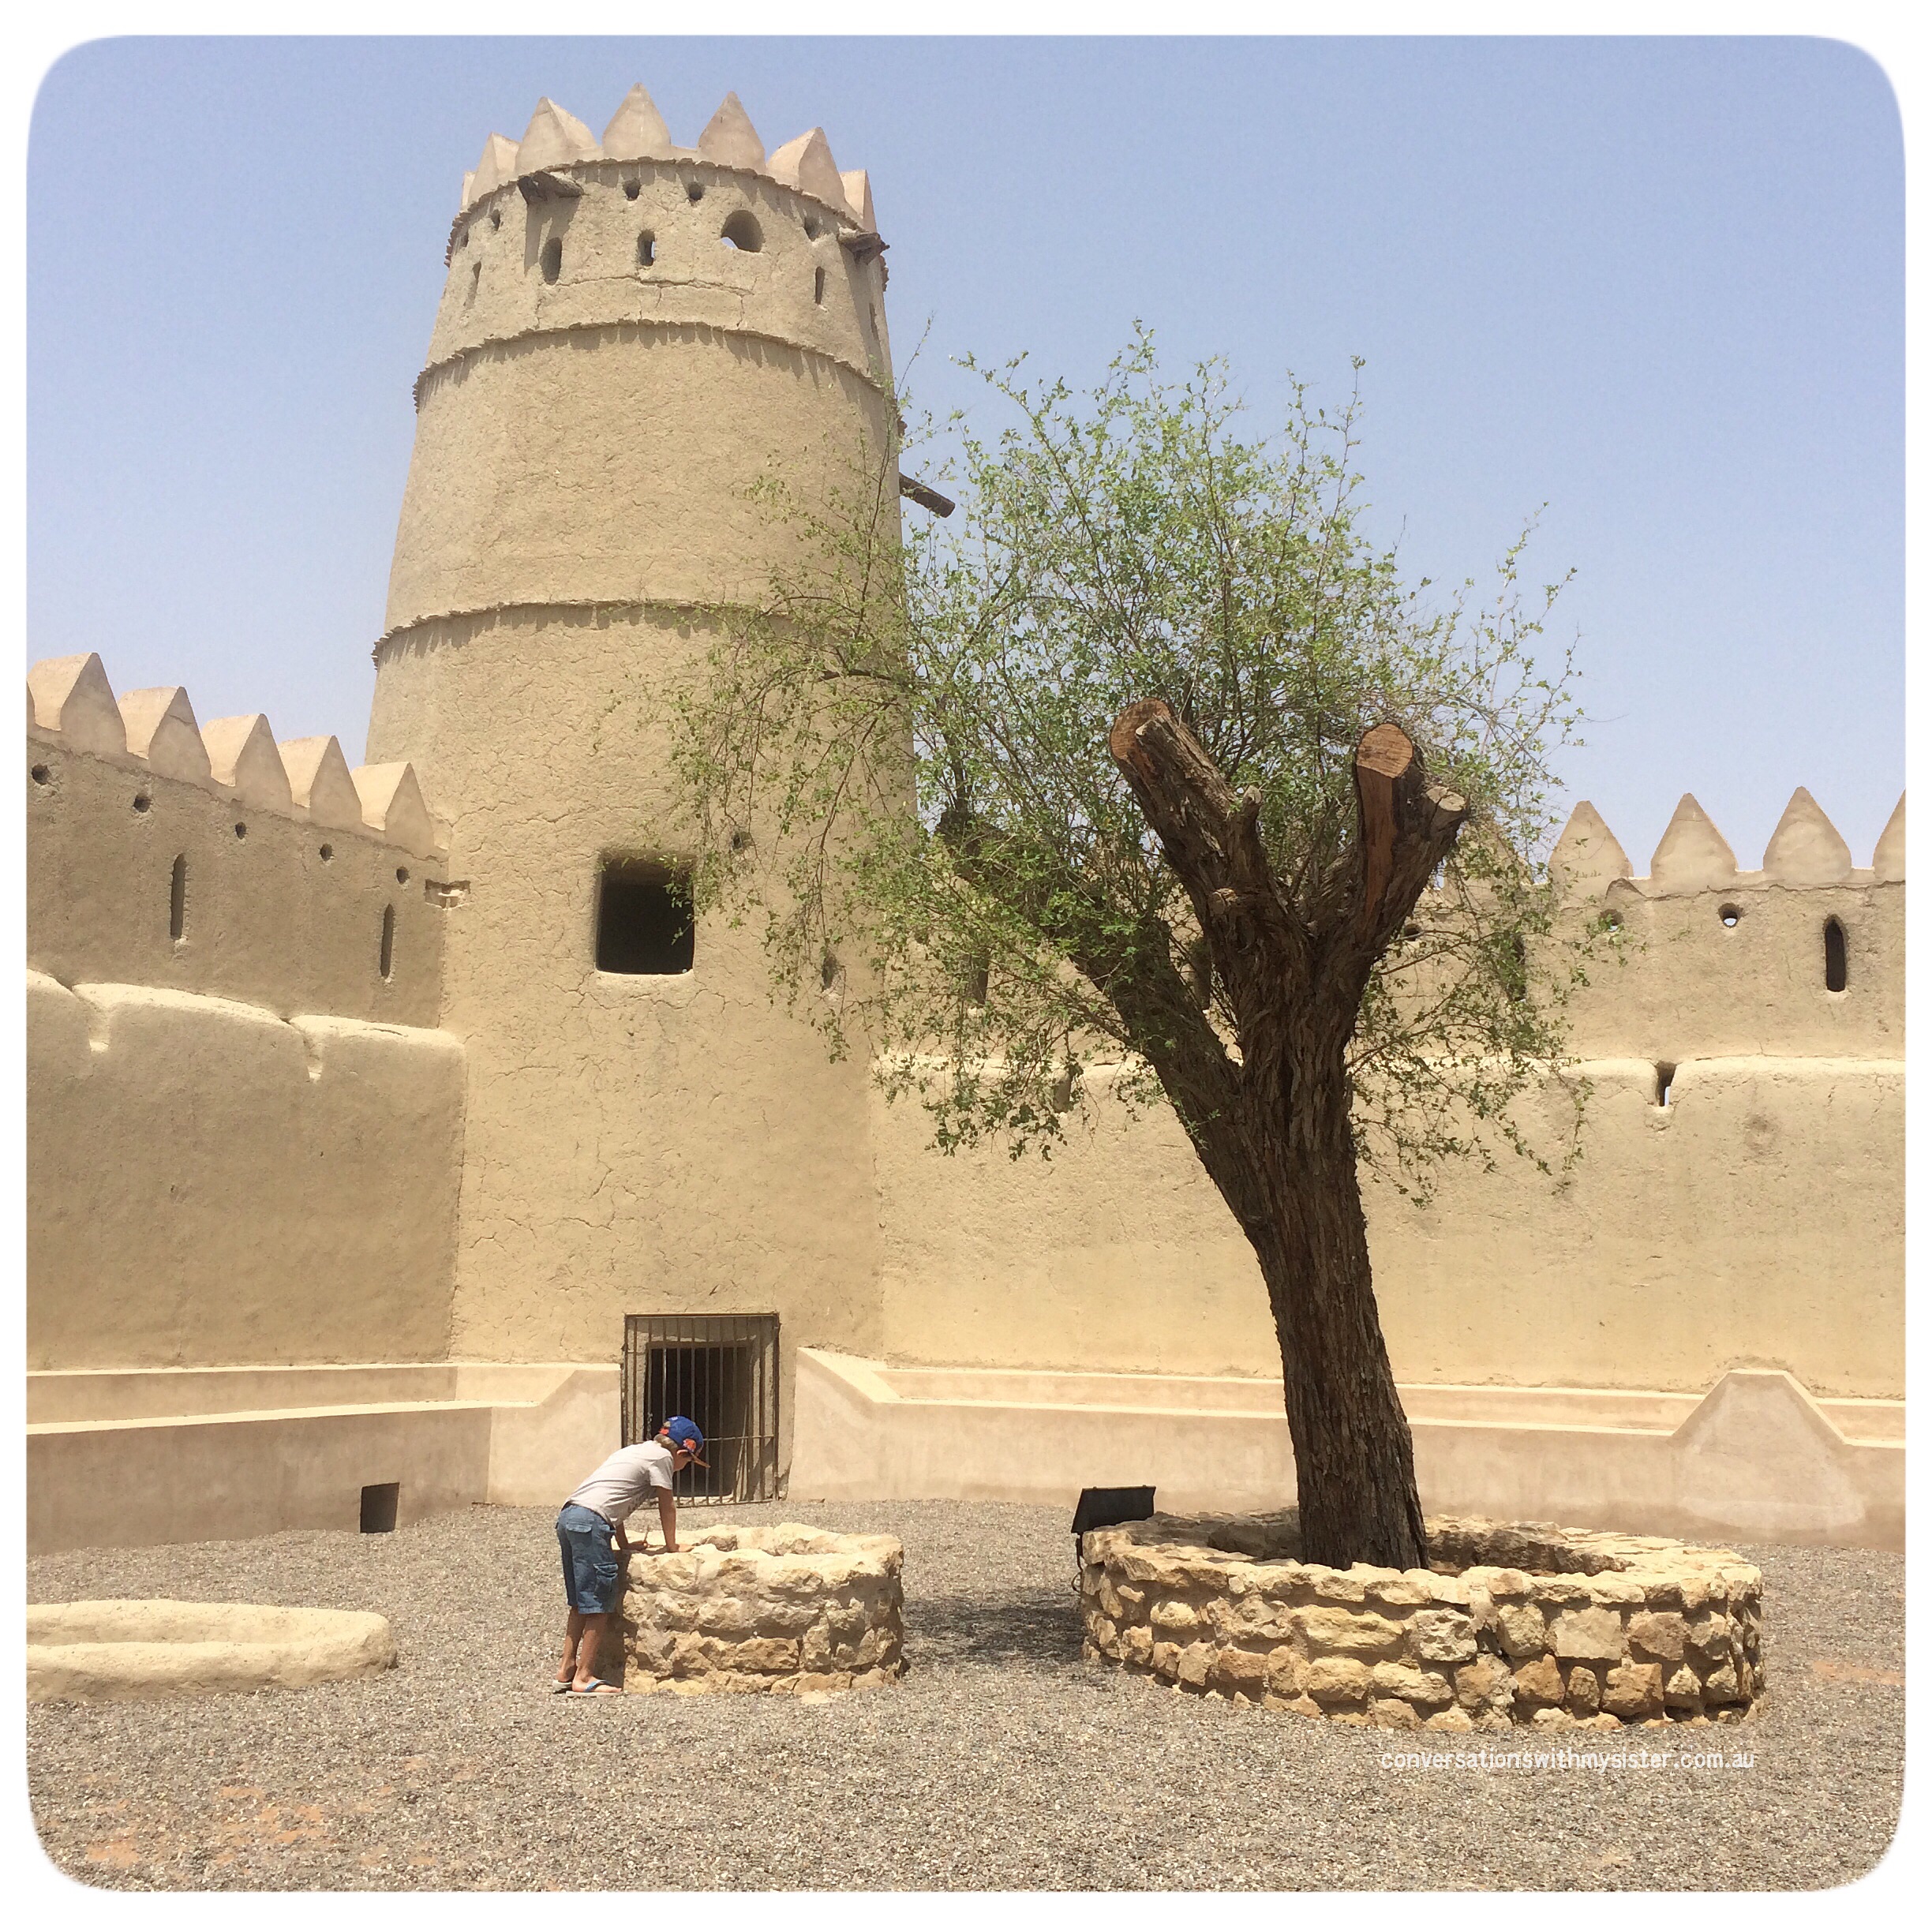 A family travel guide covering exactly what to see and do in Al Ain. All you need to know when setting off on a weekend roadtrip to visit the fourth largest city in the UAE and one of the world’s oldest permanently inhabited settlements. 